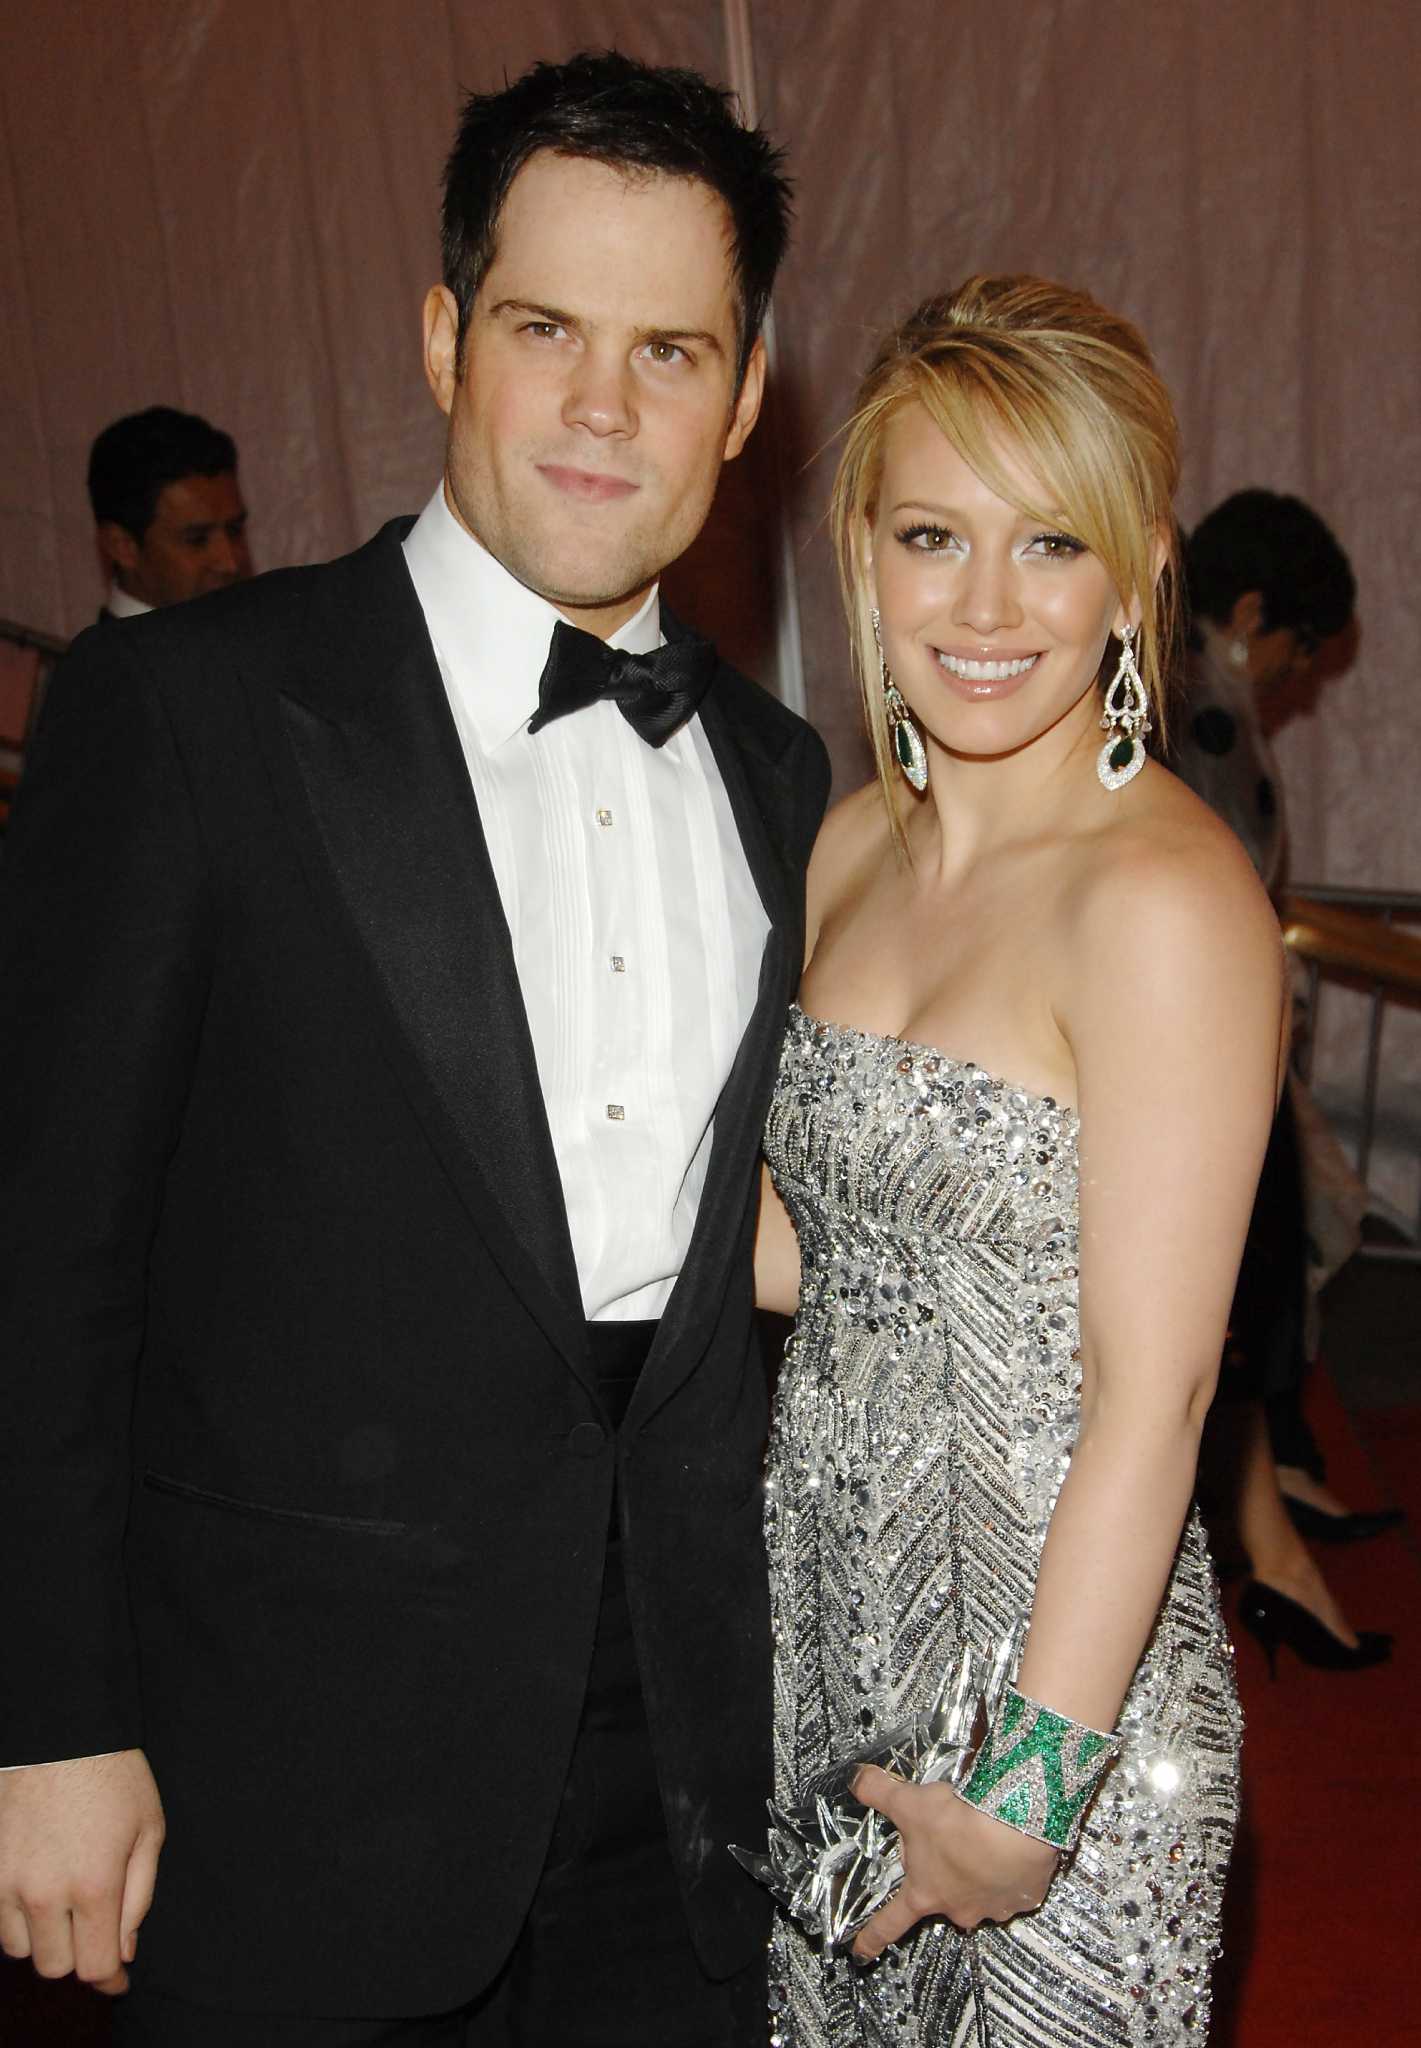 Hilary Duff's ex-husband, Mike Comrie under investigation for rape - Houston Chronicle1421 x 2048